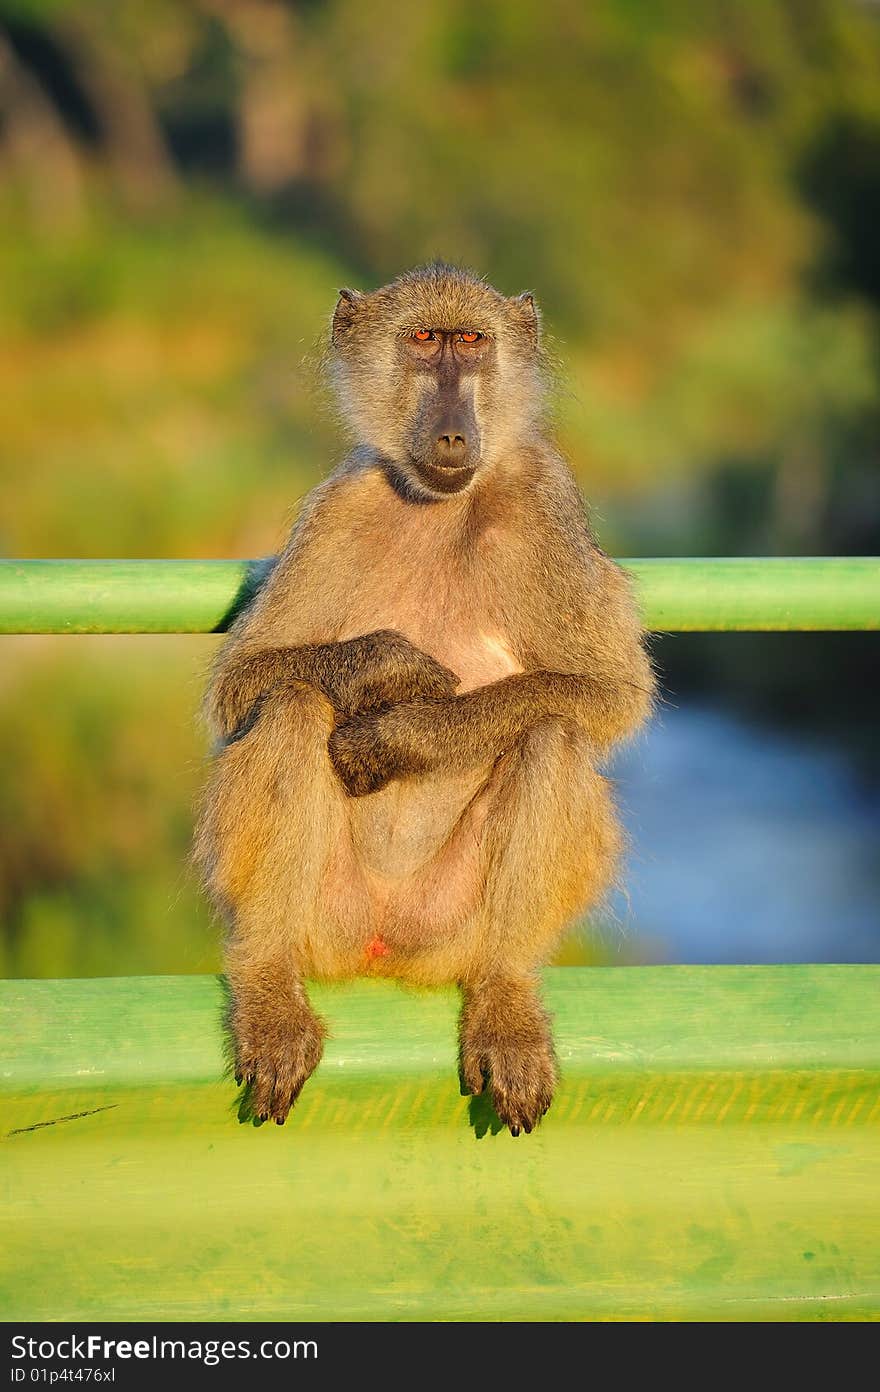 The Chacma Baboon (Papio ursinus), also known as the Cape Baboon, is, like all other baboons, from the Old World monkey family (South Africa).